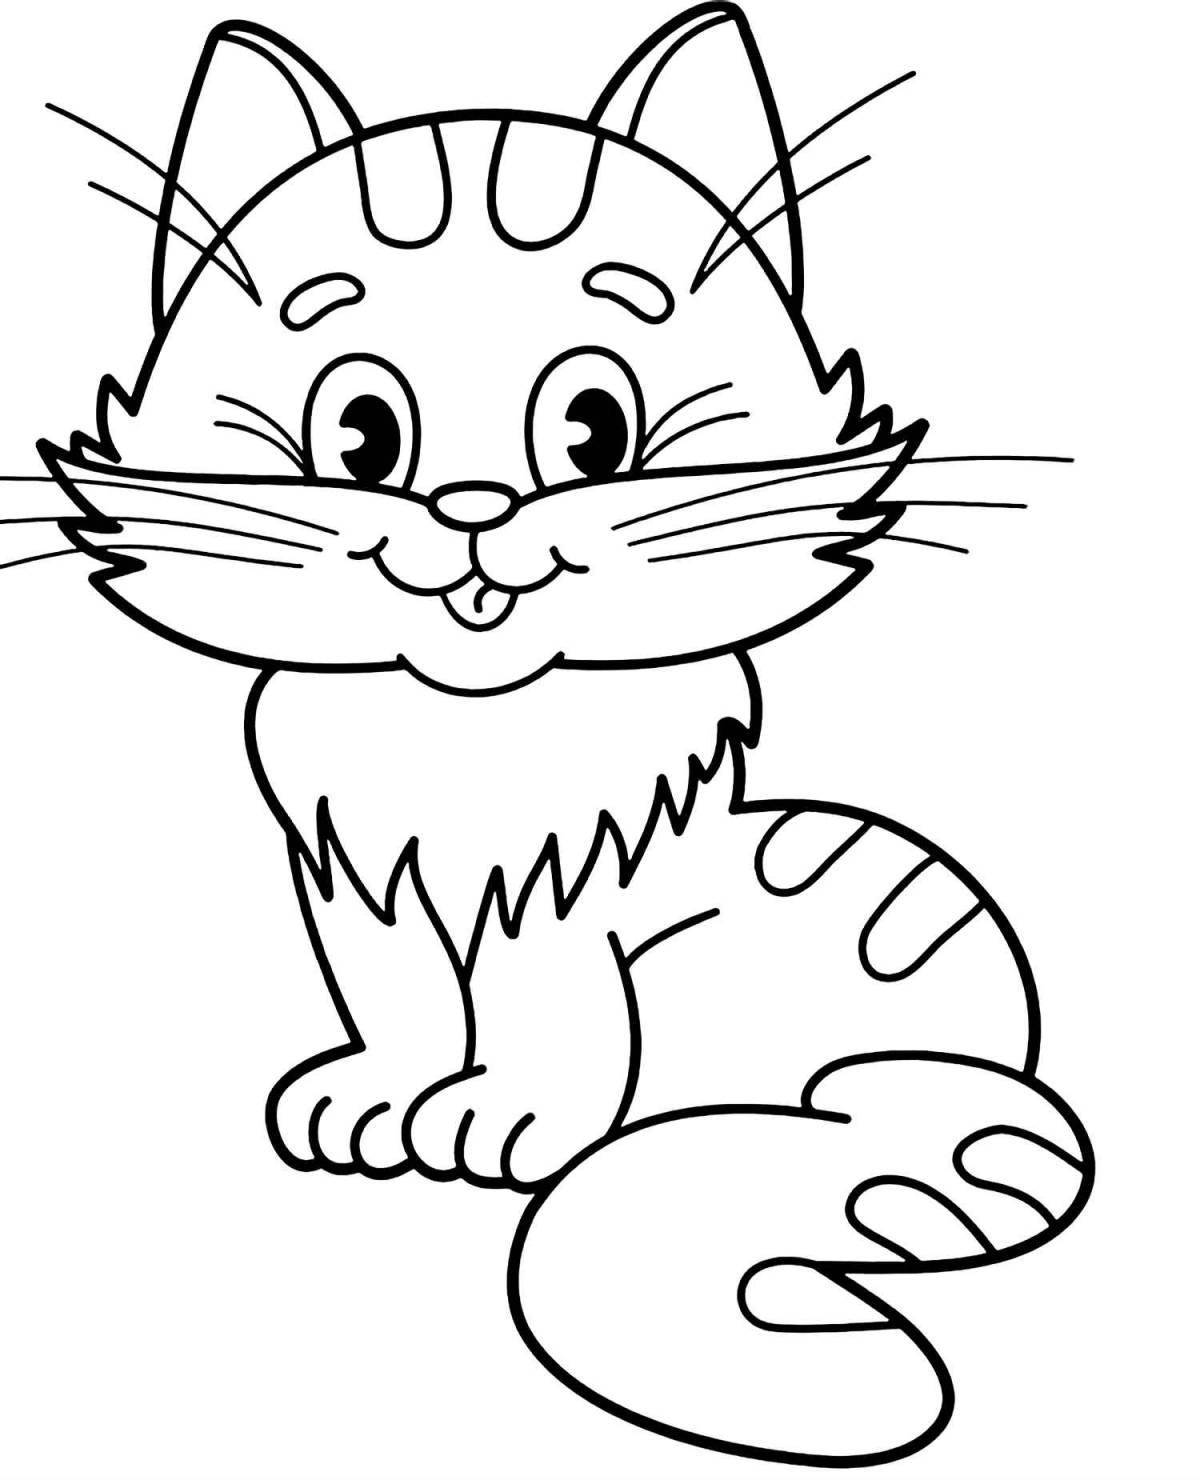 Coloring book cute black and white cat